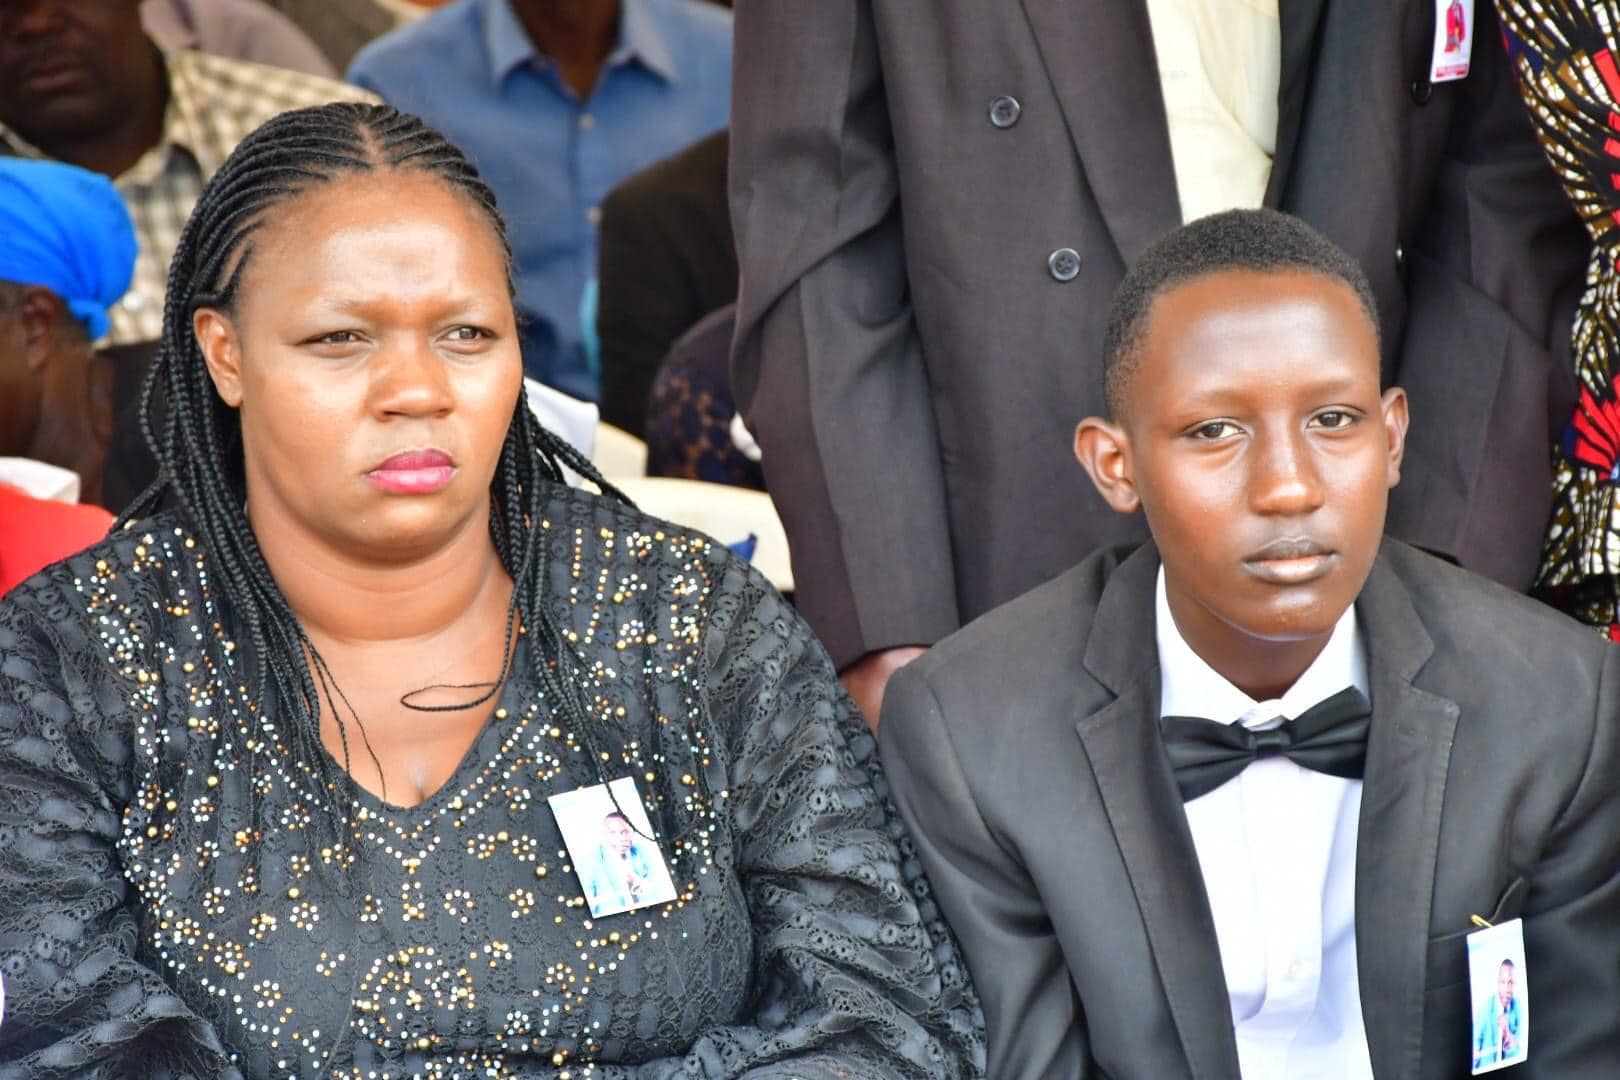 Ilagosa's Widow And Son Seen Publicly For The First Time During His Burial (PHOTOS)